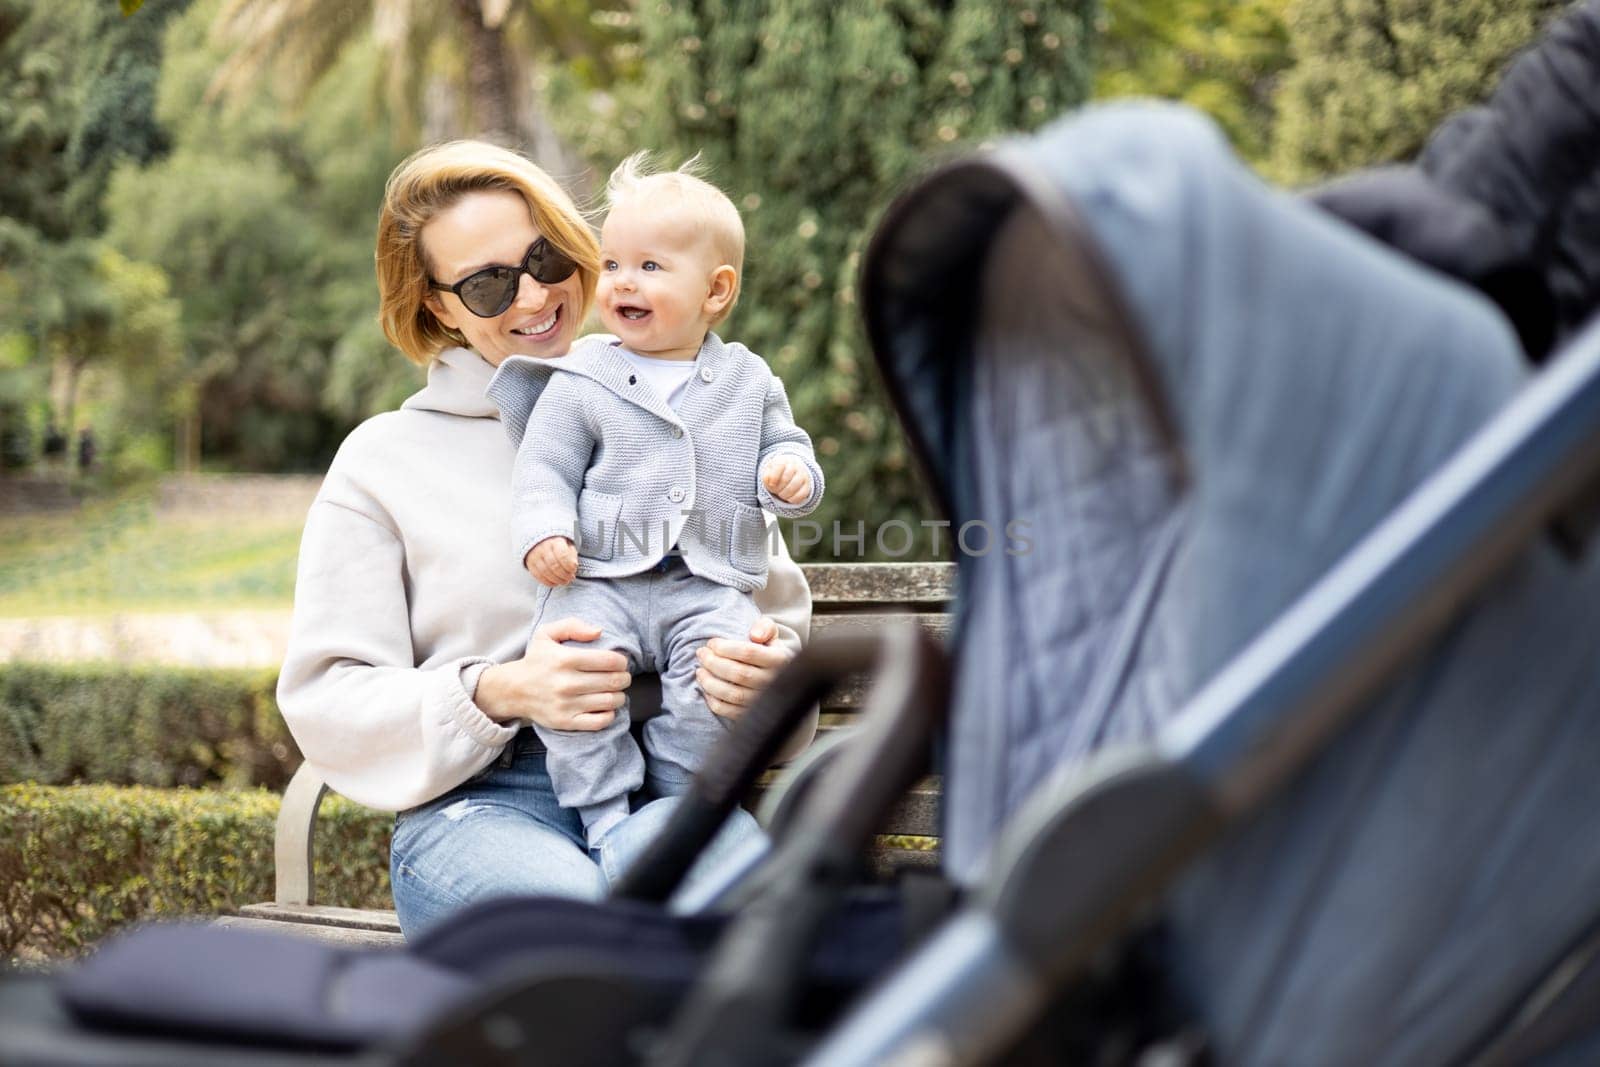 Mother sitting on bench in urban park, laughing cheerfully, holding her smiling infant baby boy child in her lap having baby stroller parked by their site